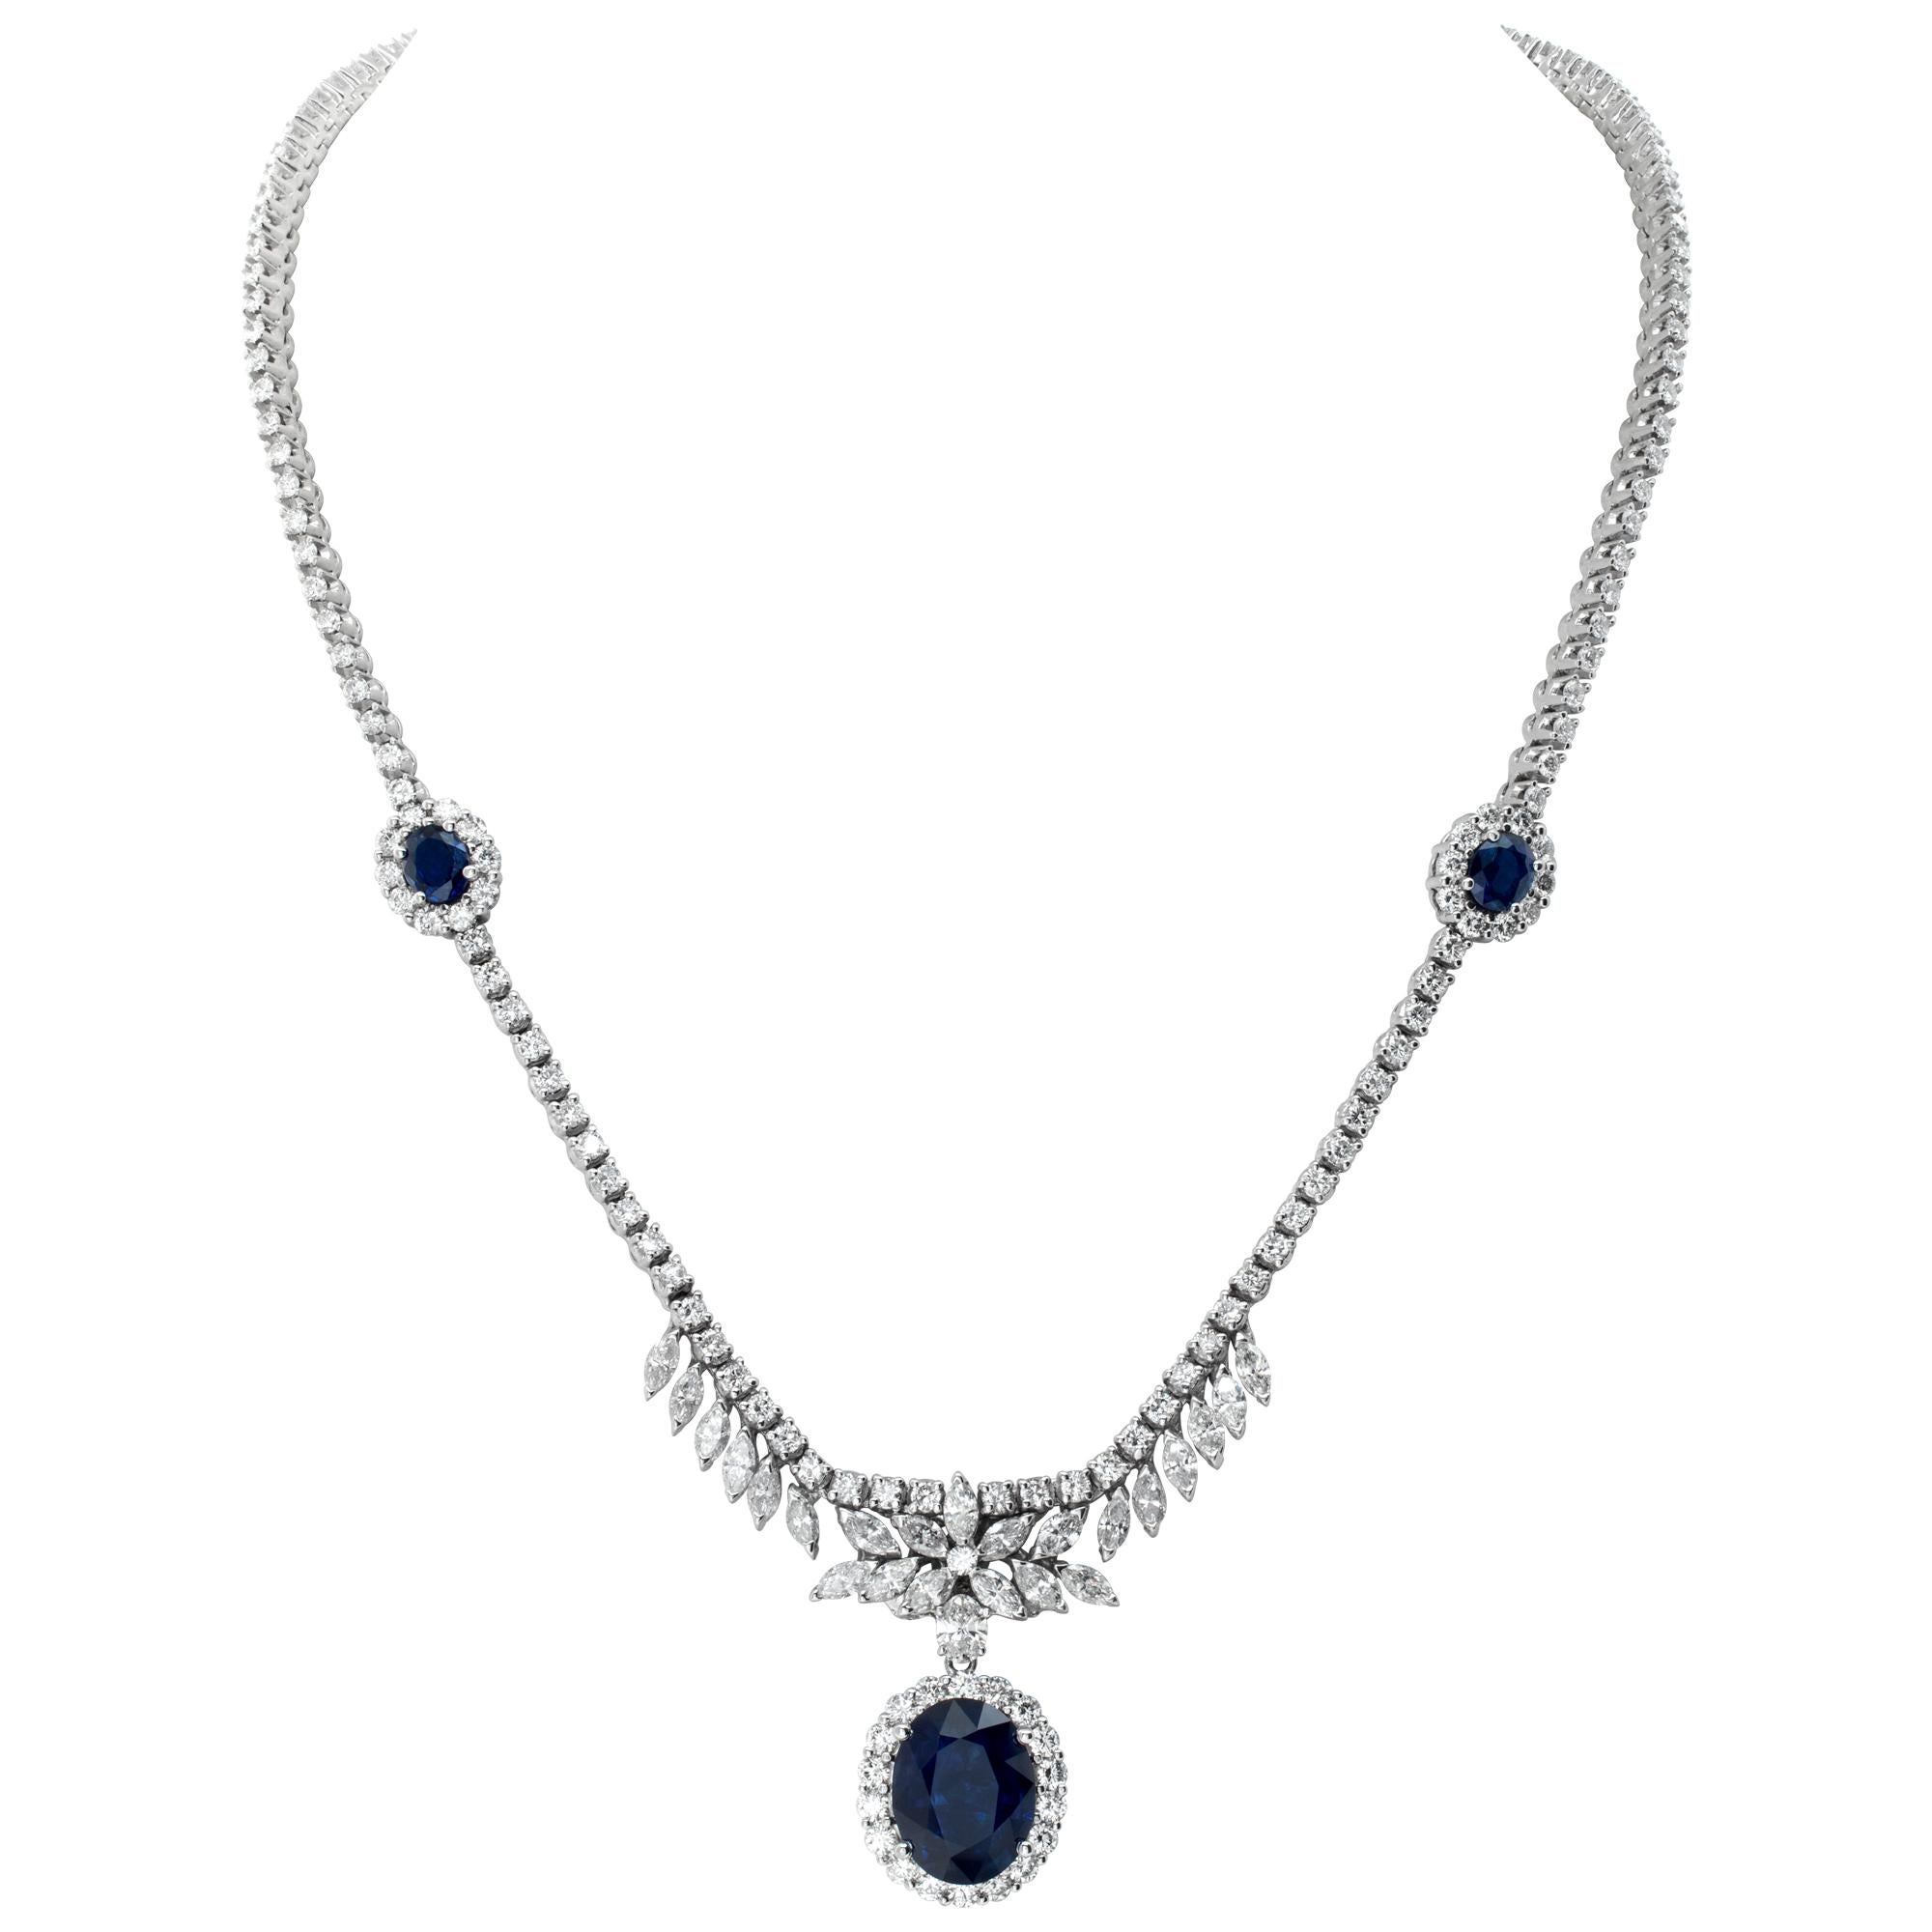 Beautiful 18k white gold necklace with 10.2 carats in round, marquise, and oval cut diamonds (G-H Color, VS Clarity) and 9.05 carats in deep blue oval cut sapphires. Length 17 inches.
